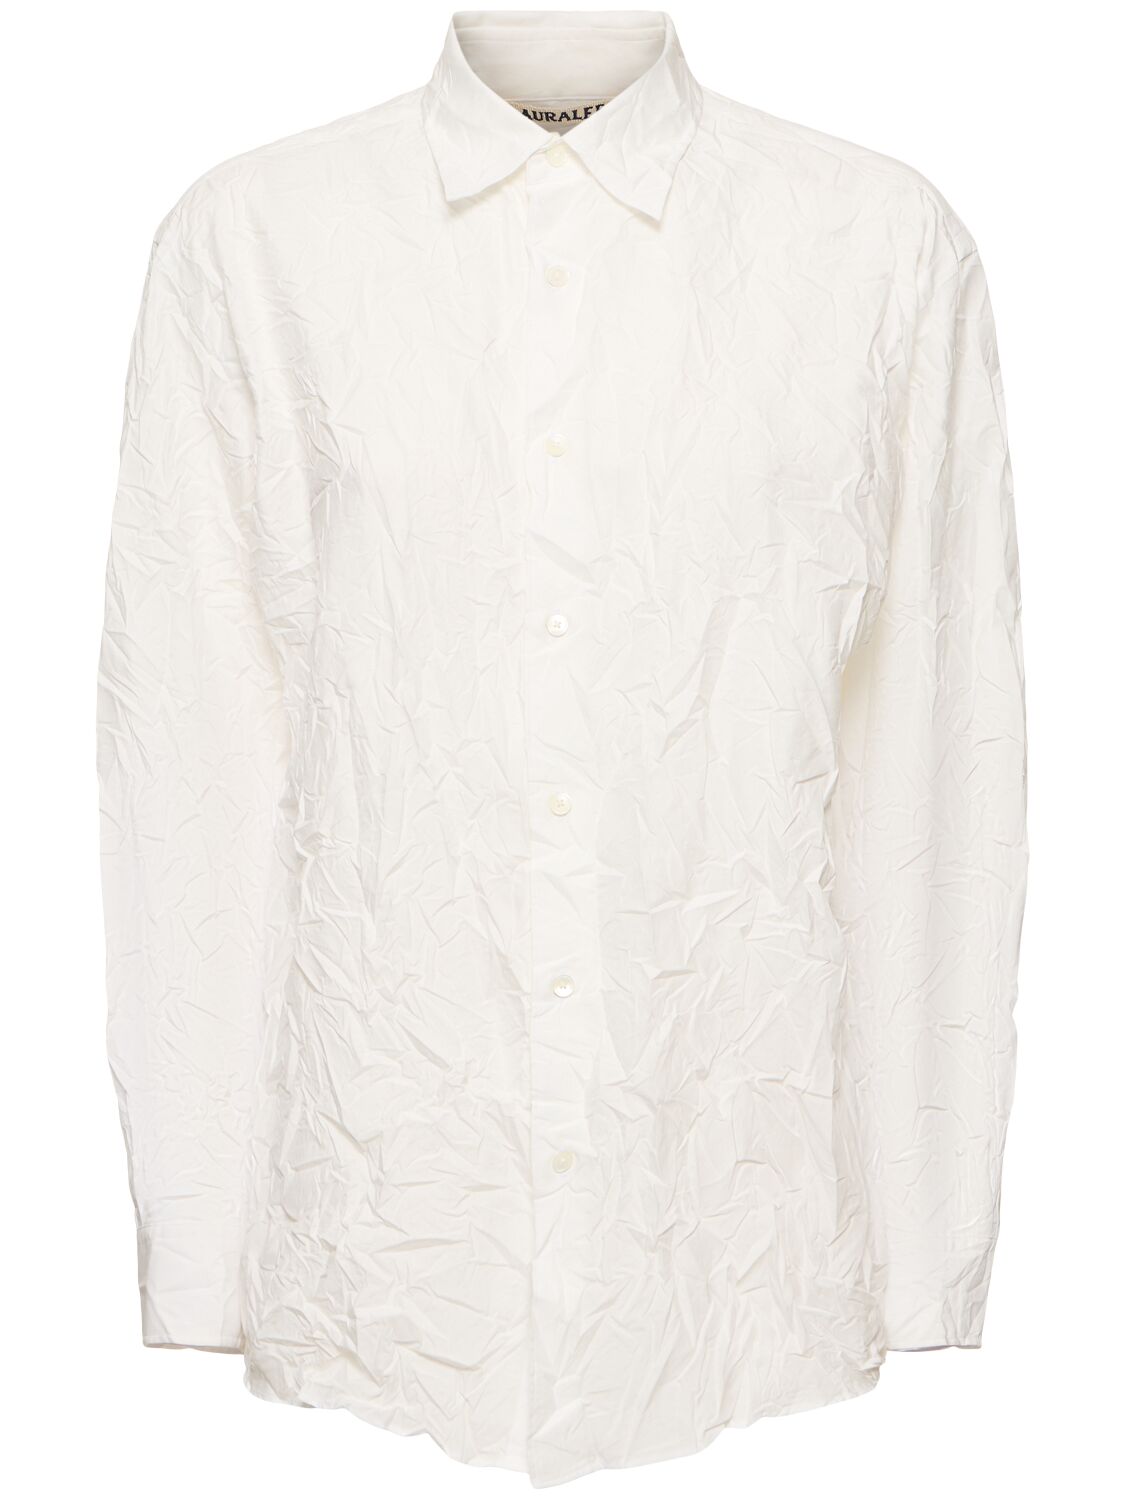 Auralee Wrinkled Cotton Twill Shirt In White